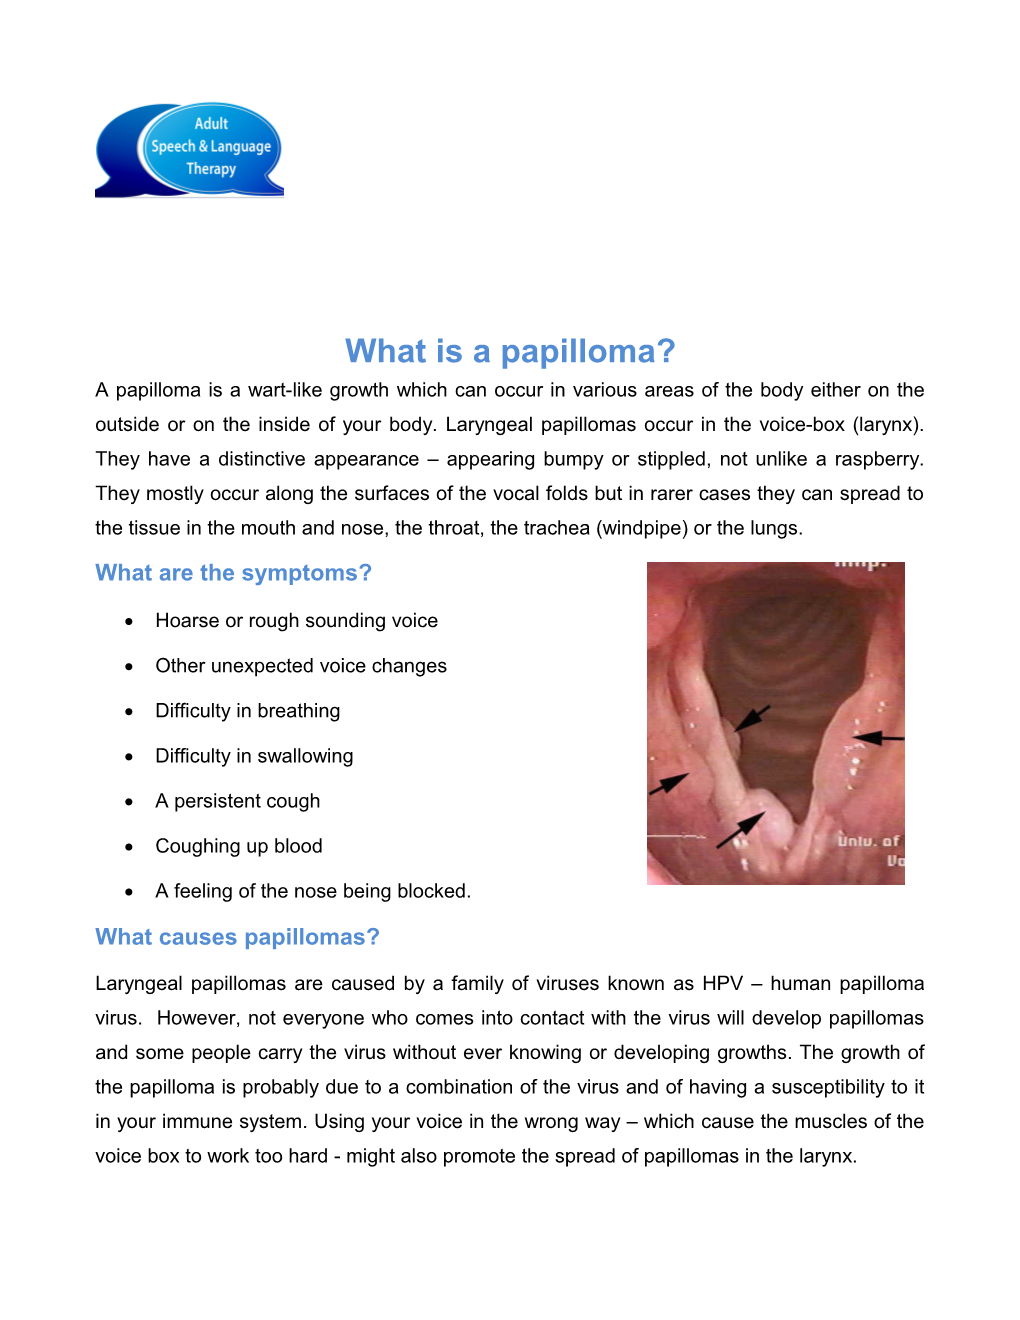 What Is a Papilloma?